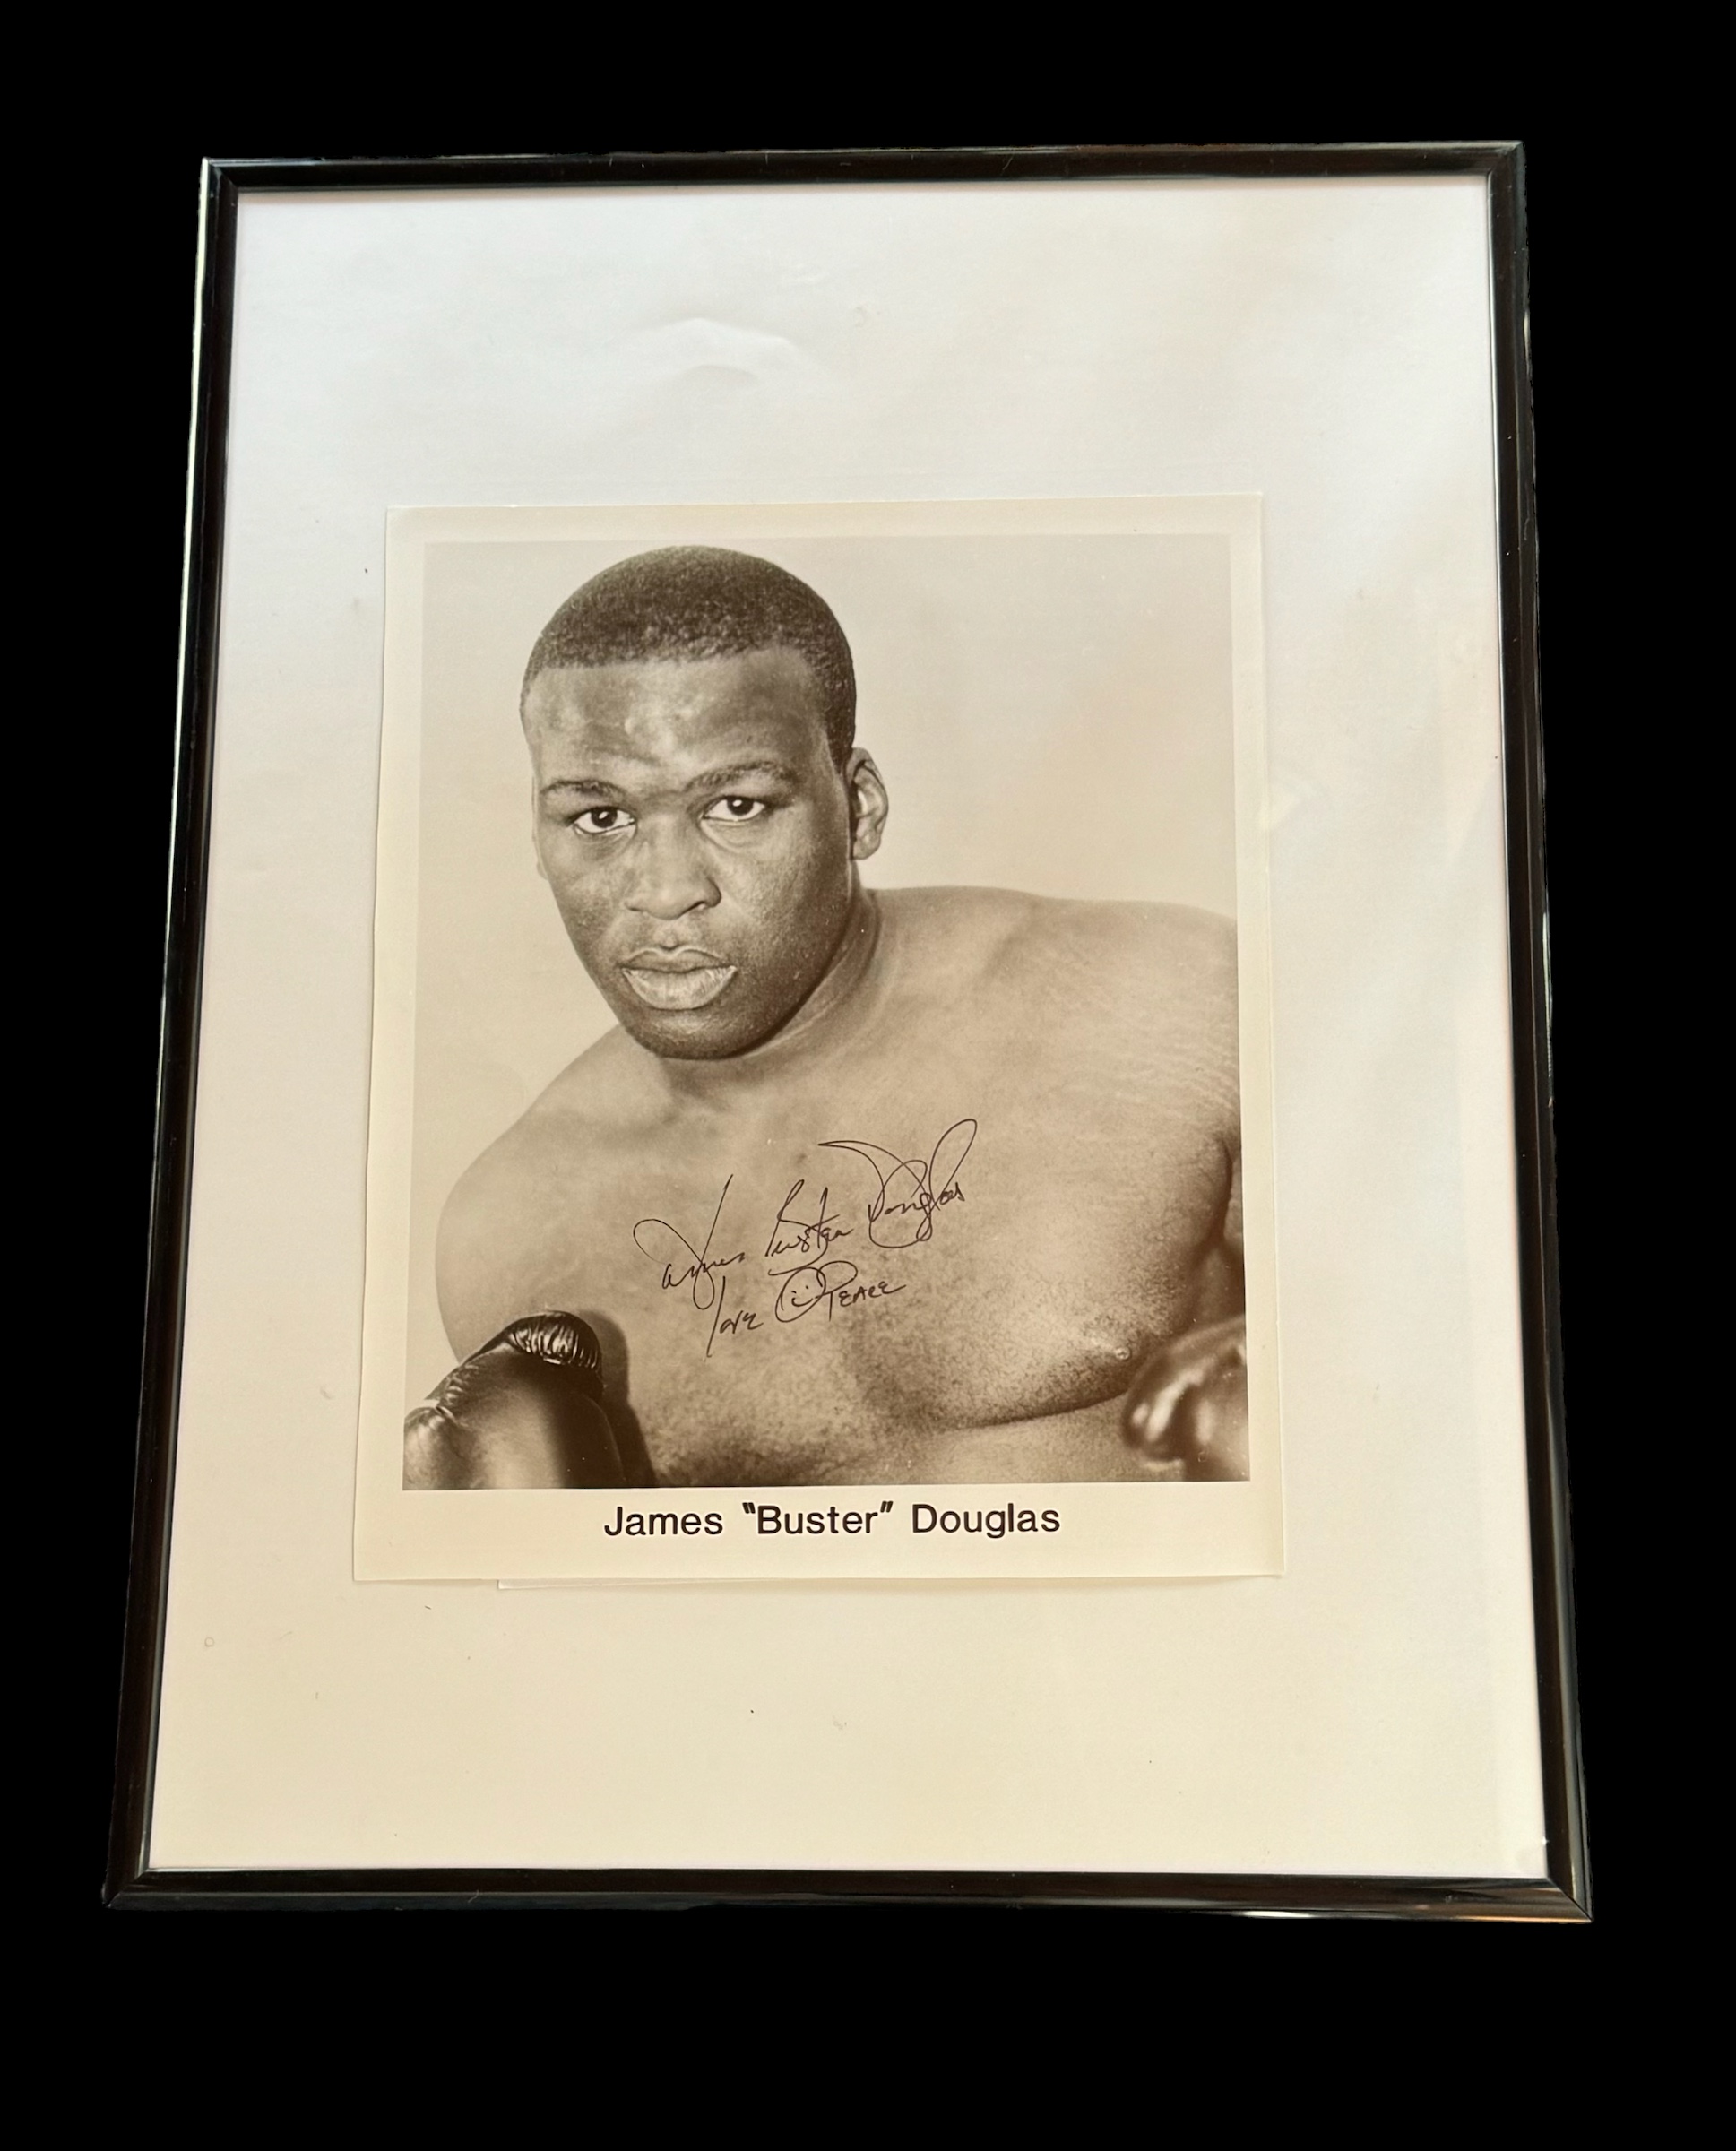 James Buster Douglas signed 16x12 inch overall framed and mounted black and white photo. Good